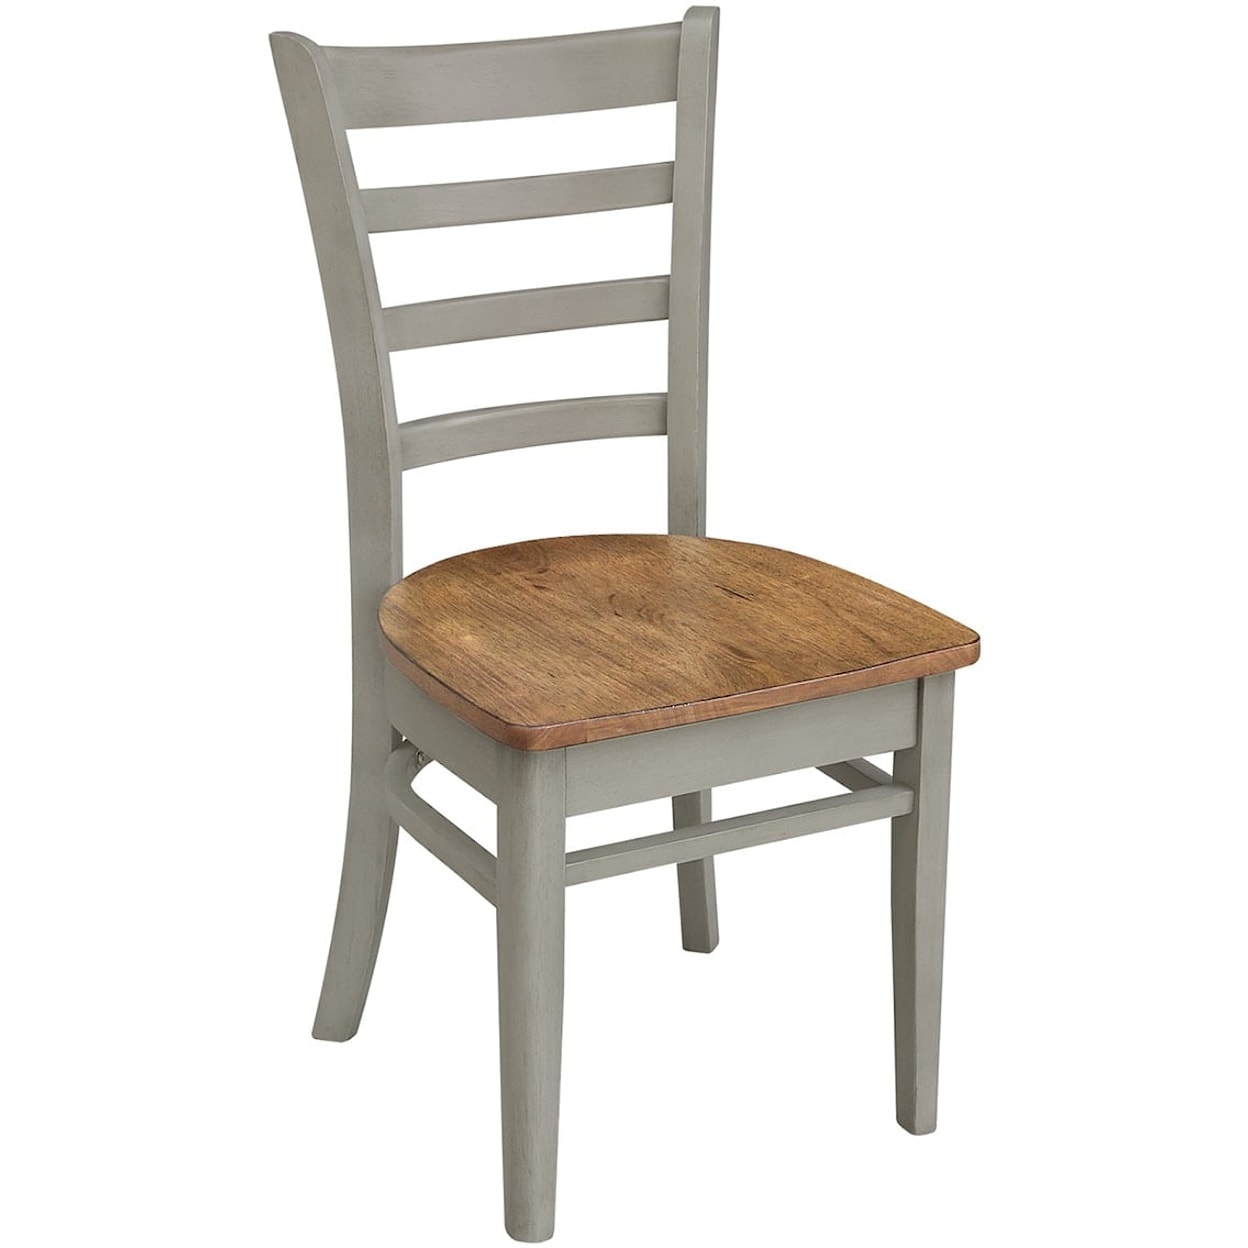 John Thomas Dining Essentials Emily Chair in Hickory/Stone